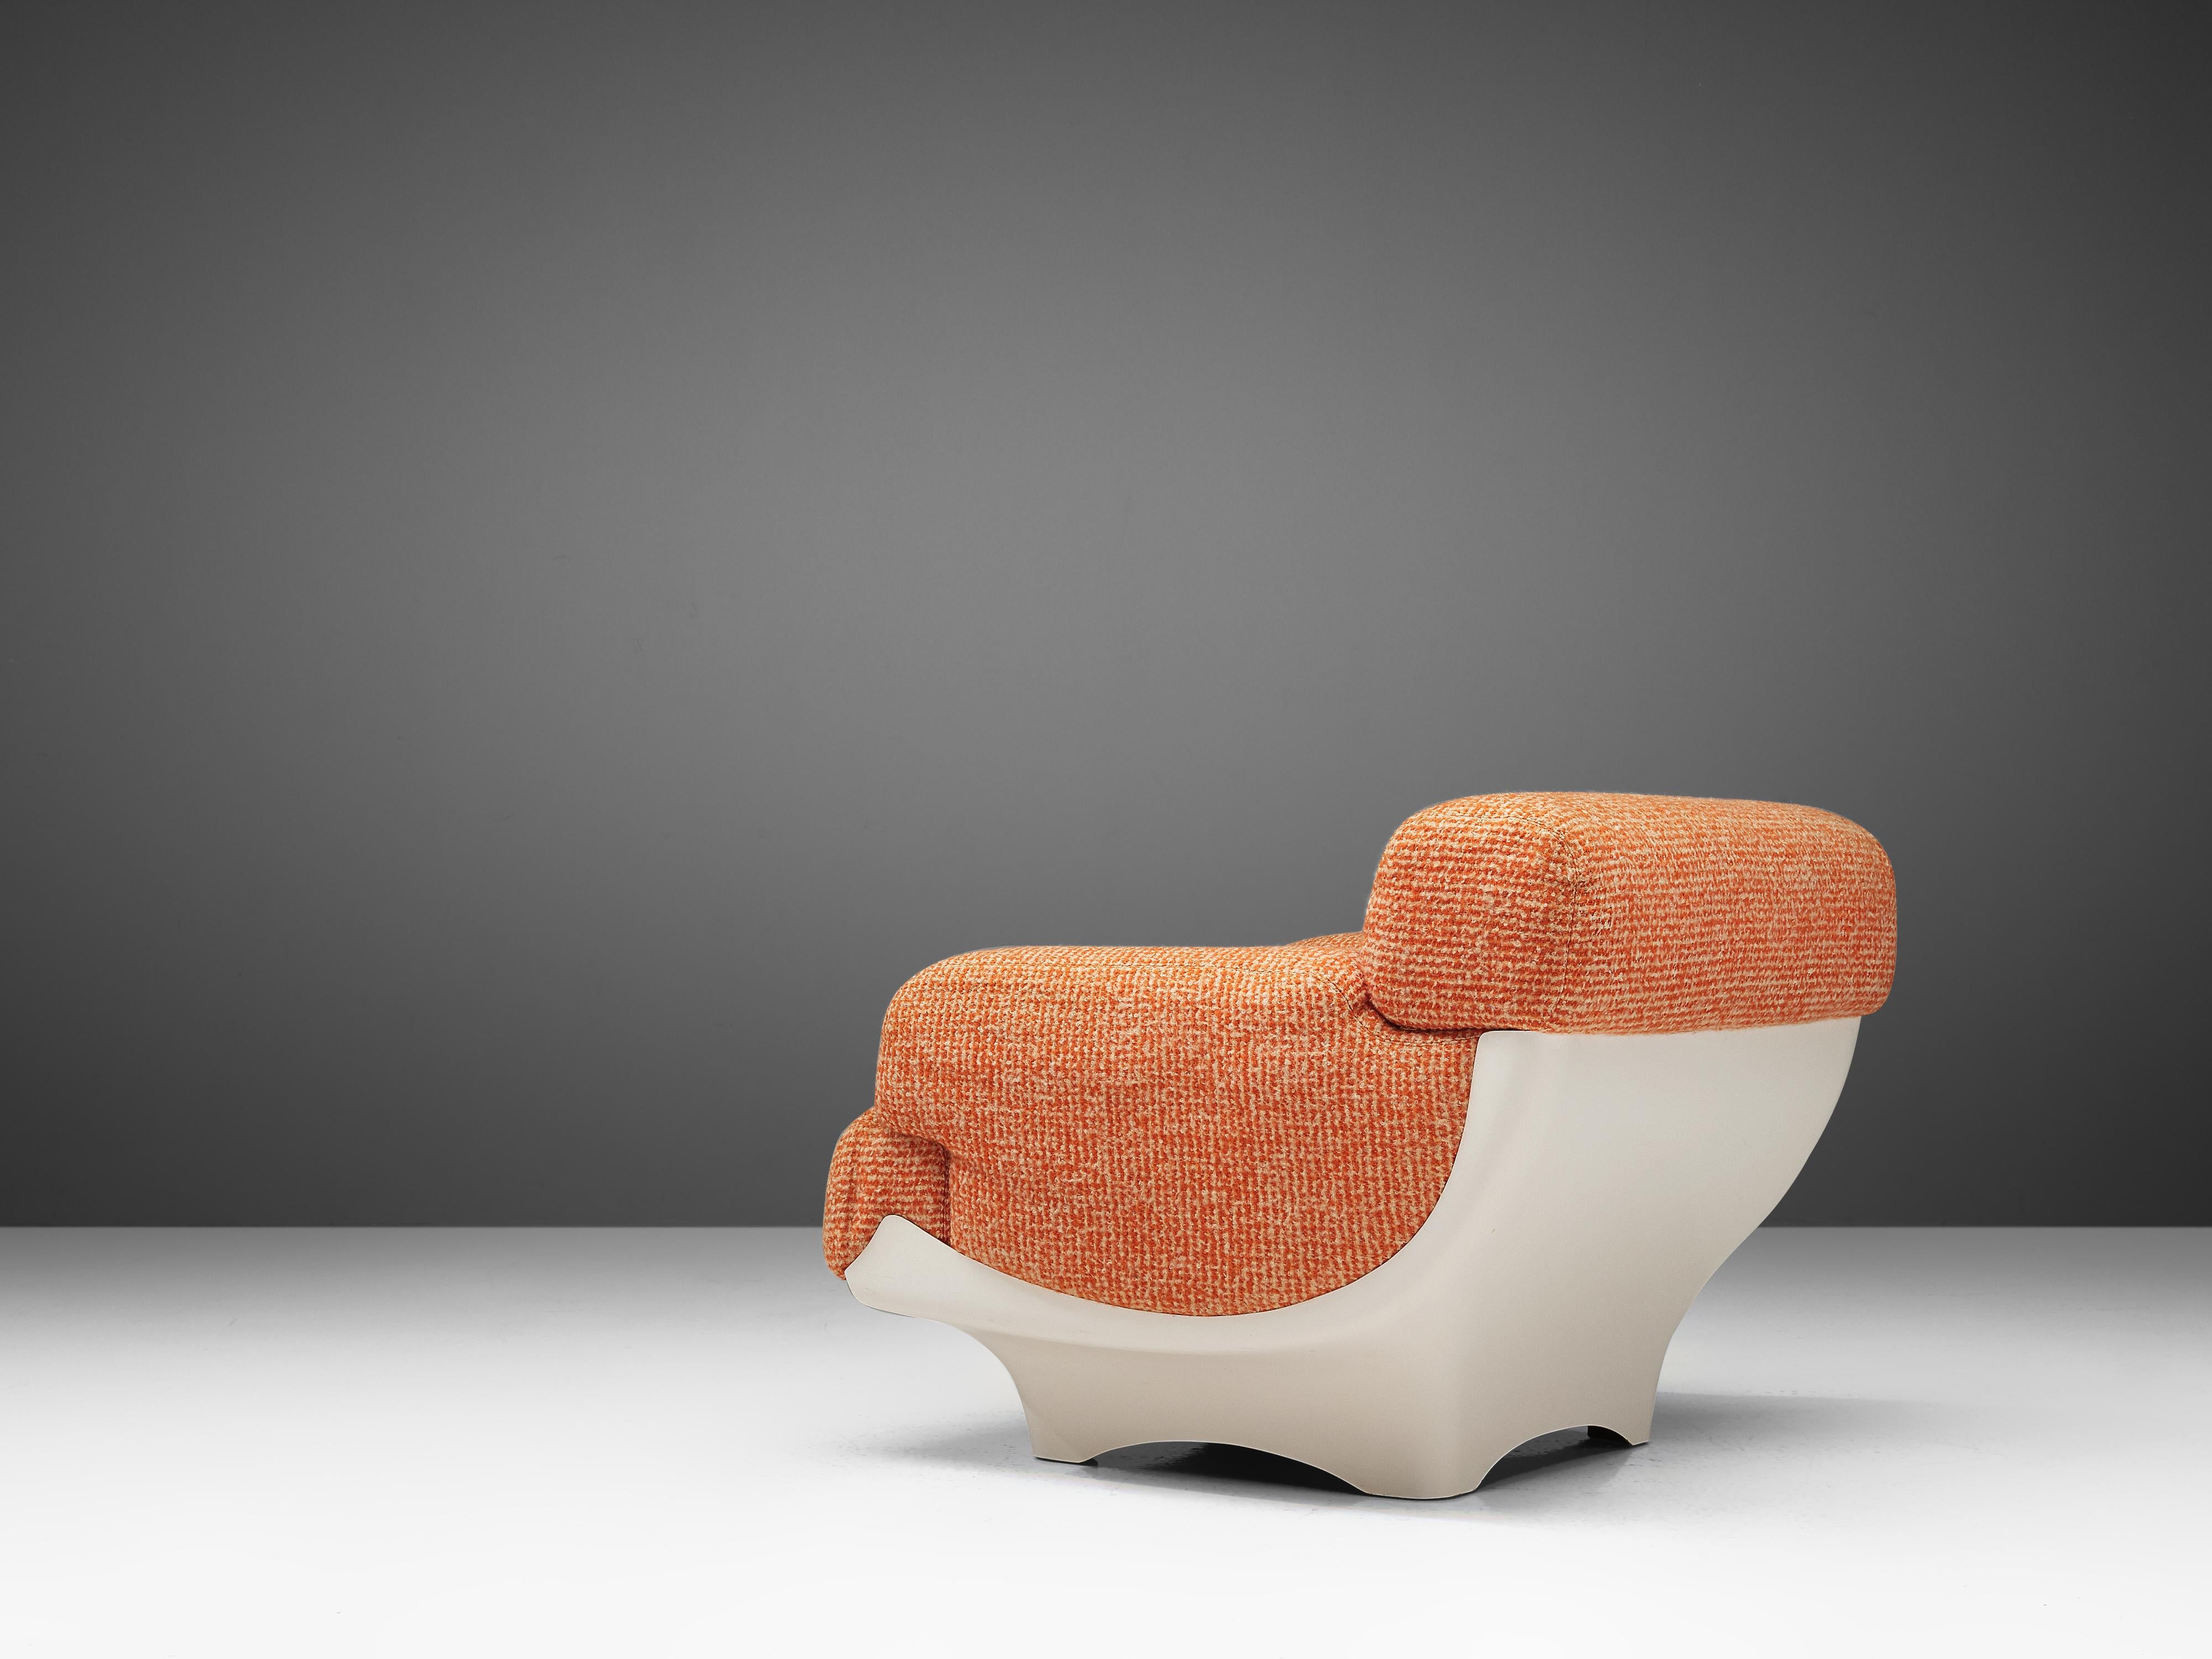 Lounge chair, fiberglass, original fabric upholstery, France, 1970s

This highly comfortable lounge chair has a very soft and inviting appearance. The textured orange fabric contrasts nicely with the white fiberglass shell. Due to the rounded shape